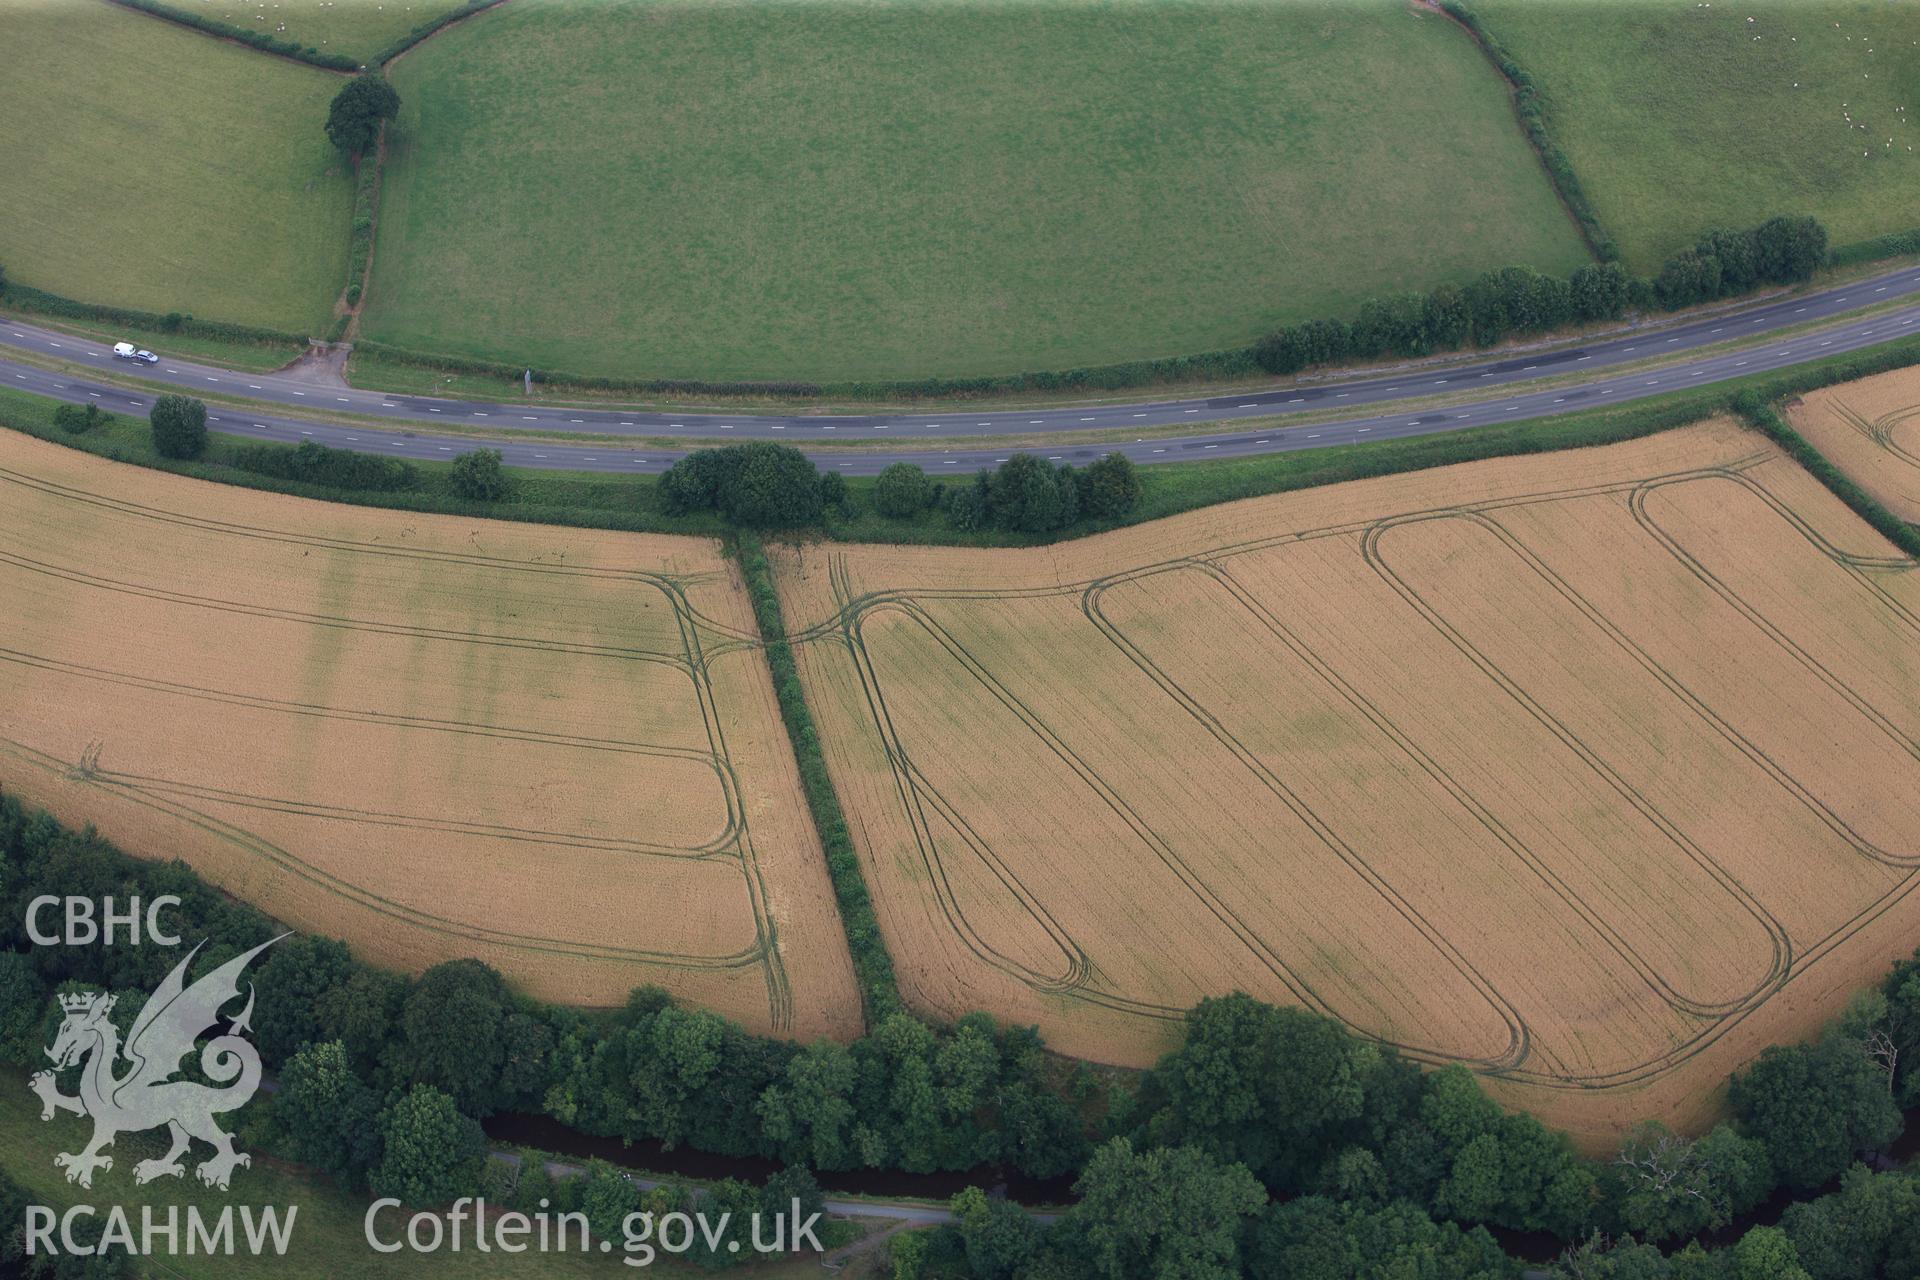 Cefn-brynich Roman fort, detailed view of cropmarks of Roman fort from south, taken by RCAHMW 1st August 2013.